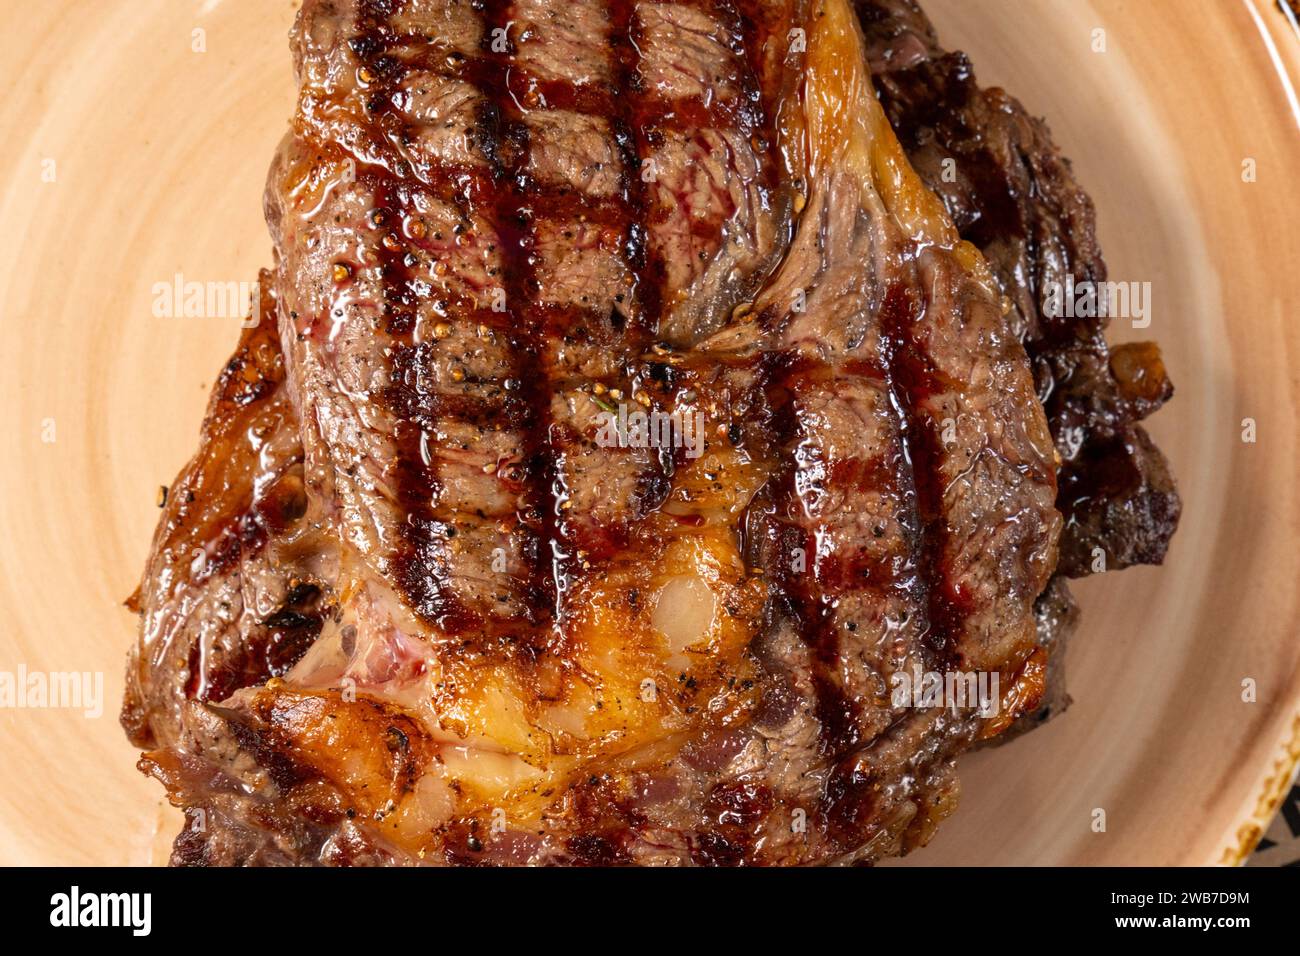 Grilled steak presented on plate, highlighting the rich caramelization and irresistible char marks. Stock Photo